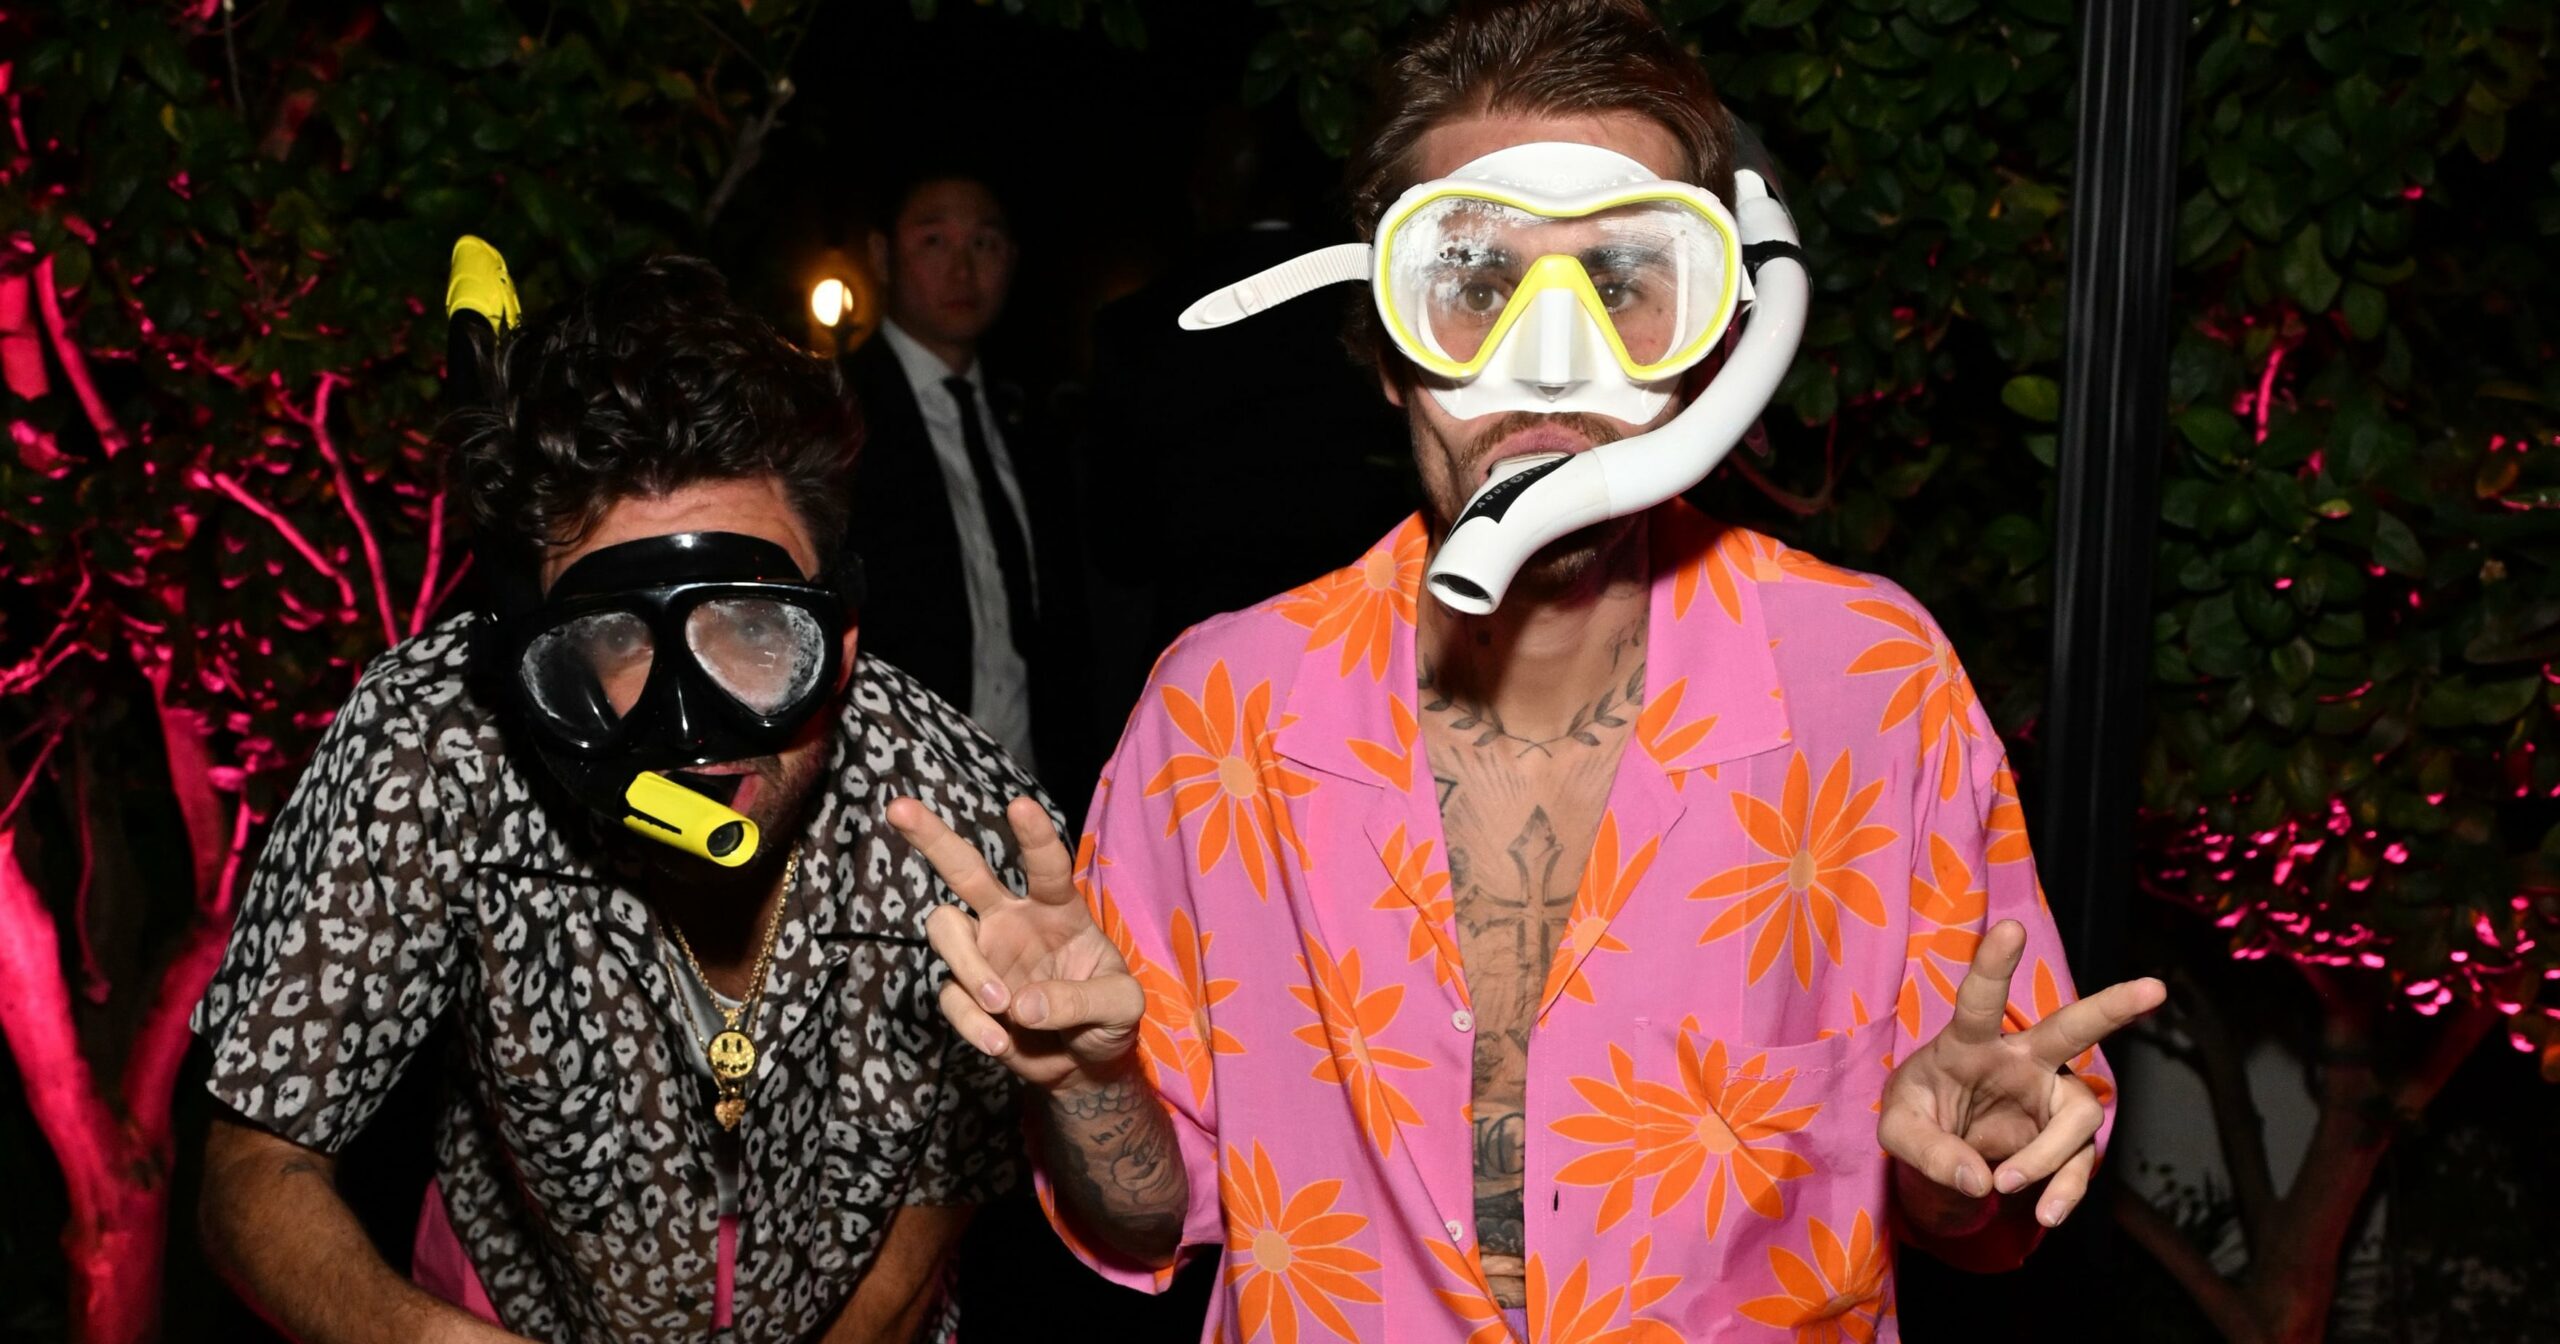 no,-really:-how-did-justin-bieber-spend-an-entire-halloween-party-in-massive-flippers?